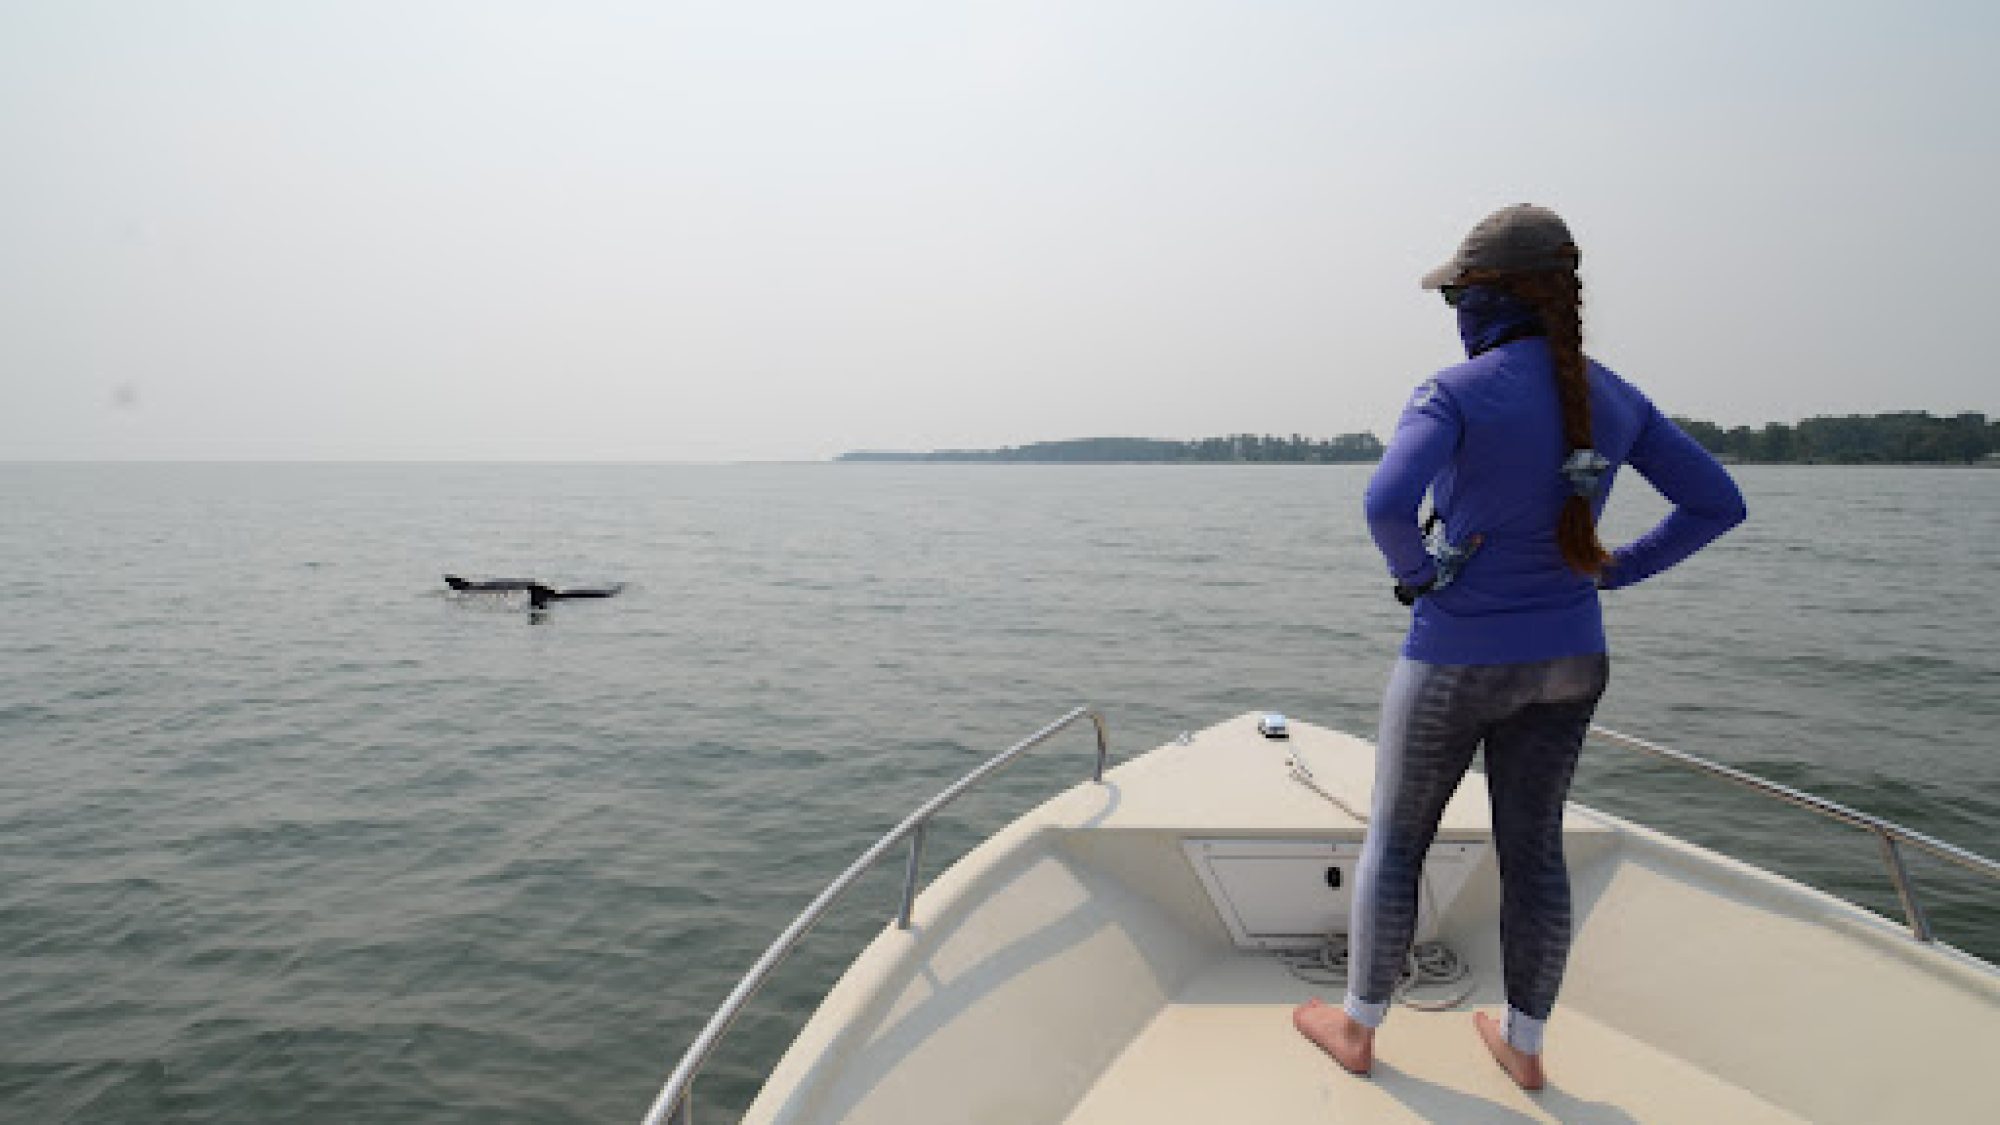 Graduate student Melissa Collier stands on the bow of boat looking into the river for dolphins as a result of her grant research award